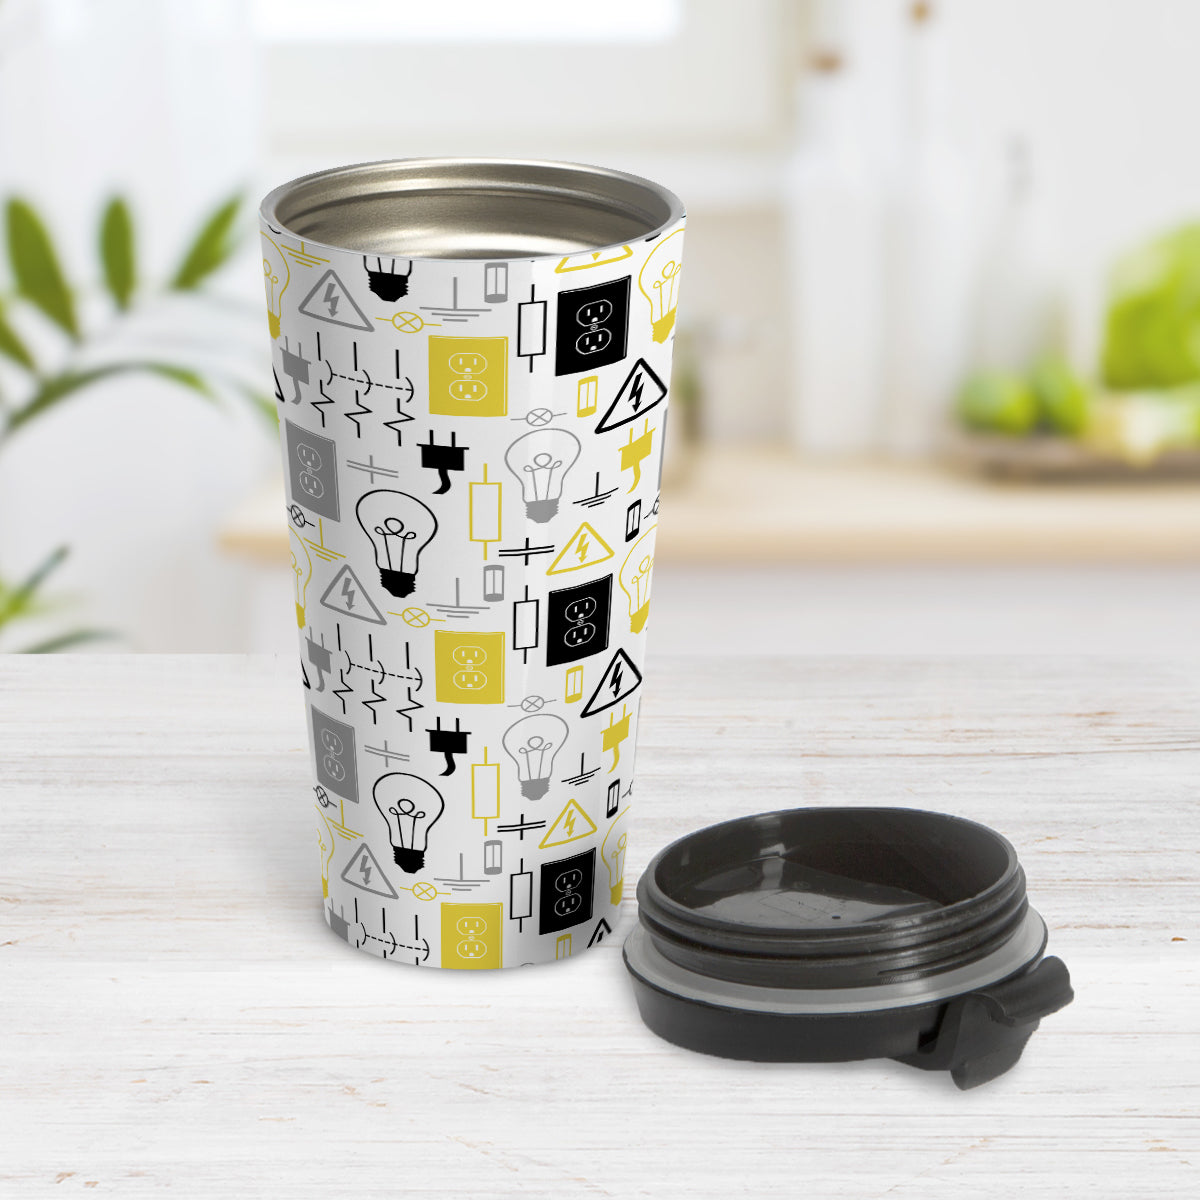 Yellow Gray Electrical Electrician Travel Mug (15oz) at Amy's Coffee Mugs. A stainless steel travel mug designed with an electrical pattern with light bulbs, wall sockets, plugs, fuses, and other electricity symbols in yellow, gray, and black colors. This travel mug is perfect for people who work a trade as an electrician or love working with electronics. Photo shows the cup open with the lid on the table beside it. 